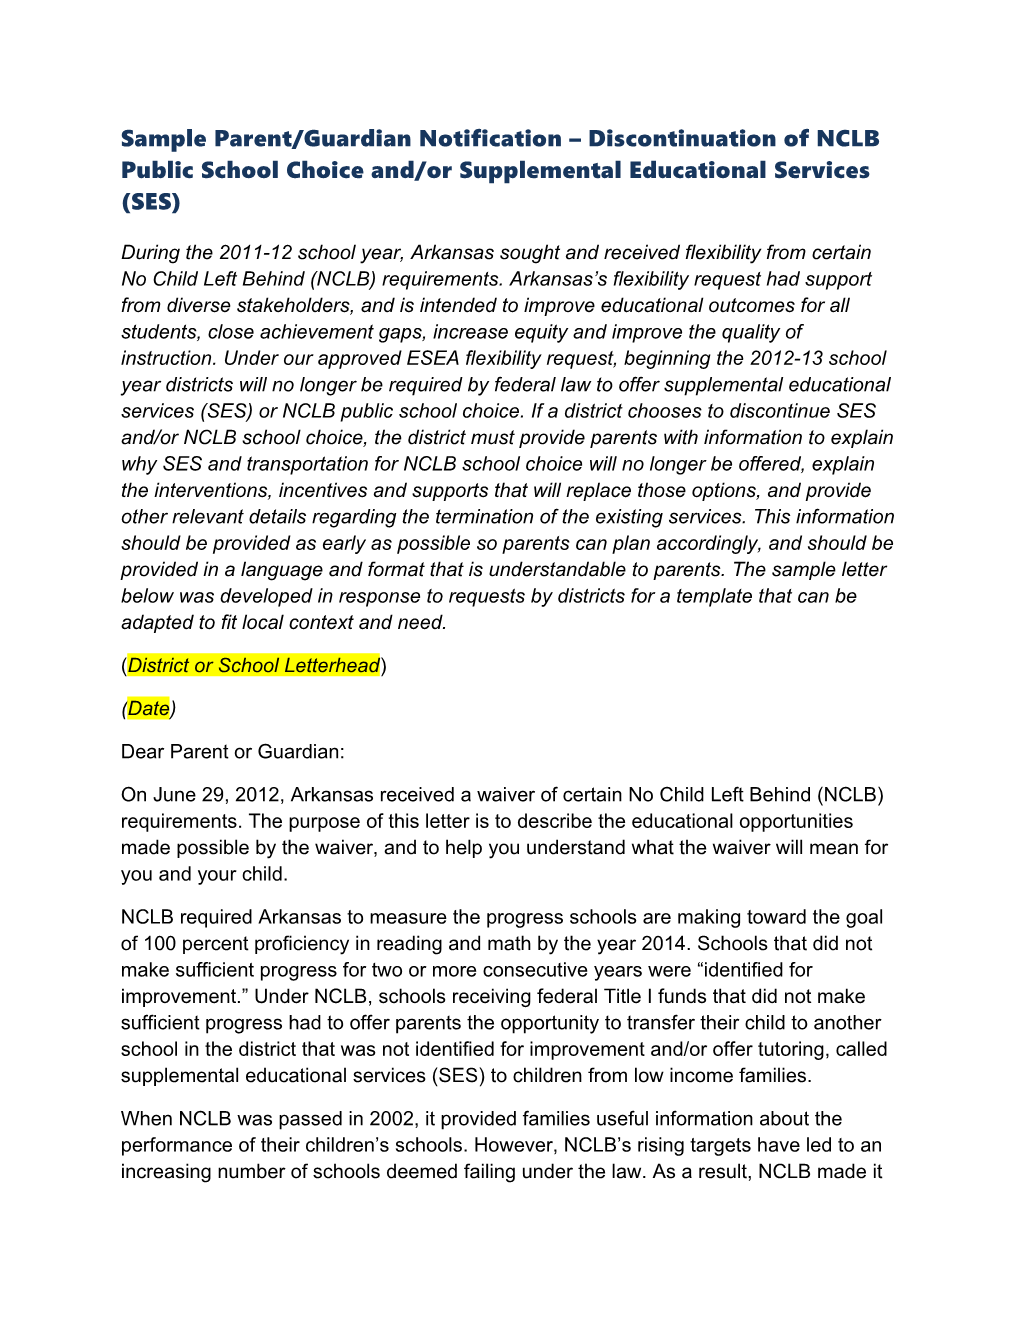 Sample Parent/Guardian Notification Discontinuation of NCLB Public School Choice And/Or